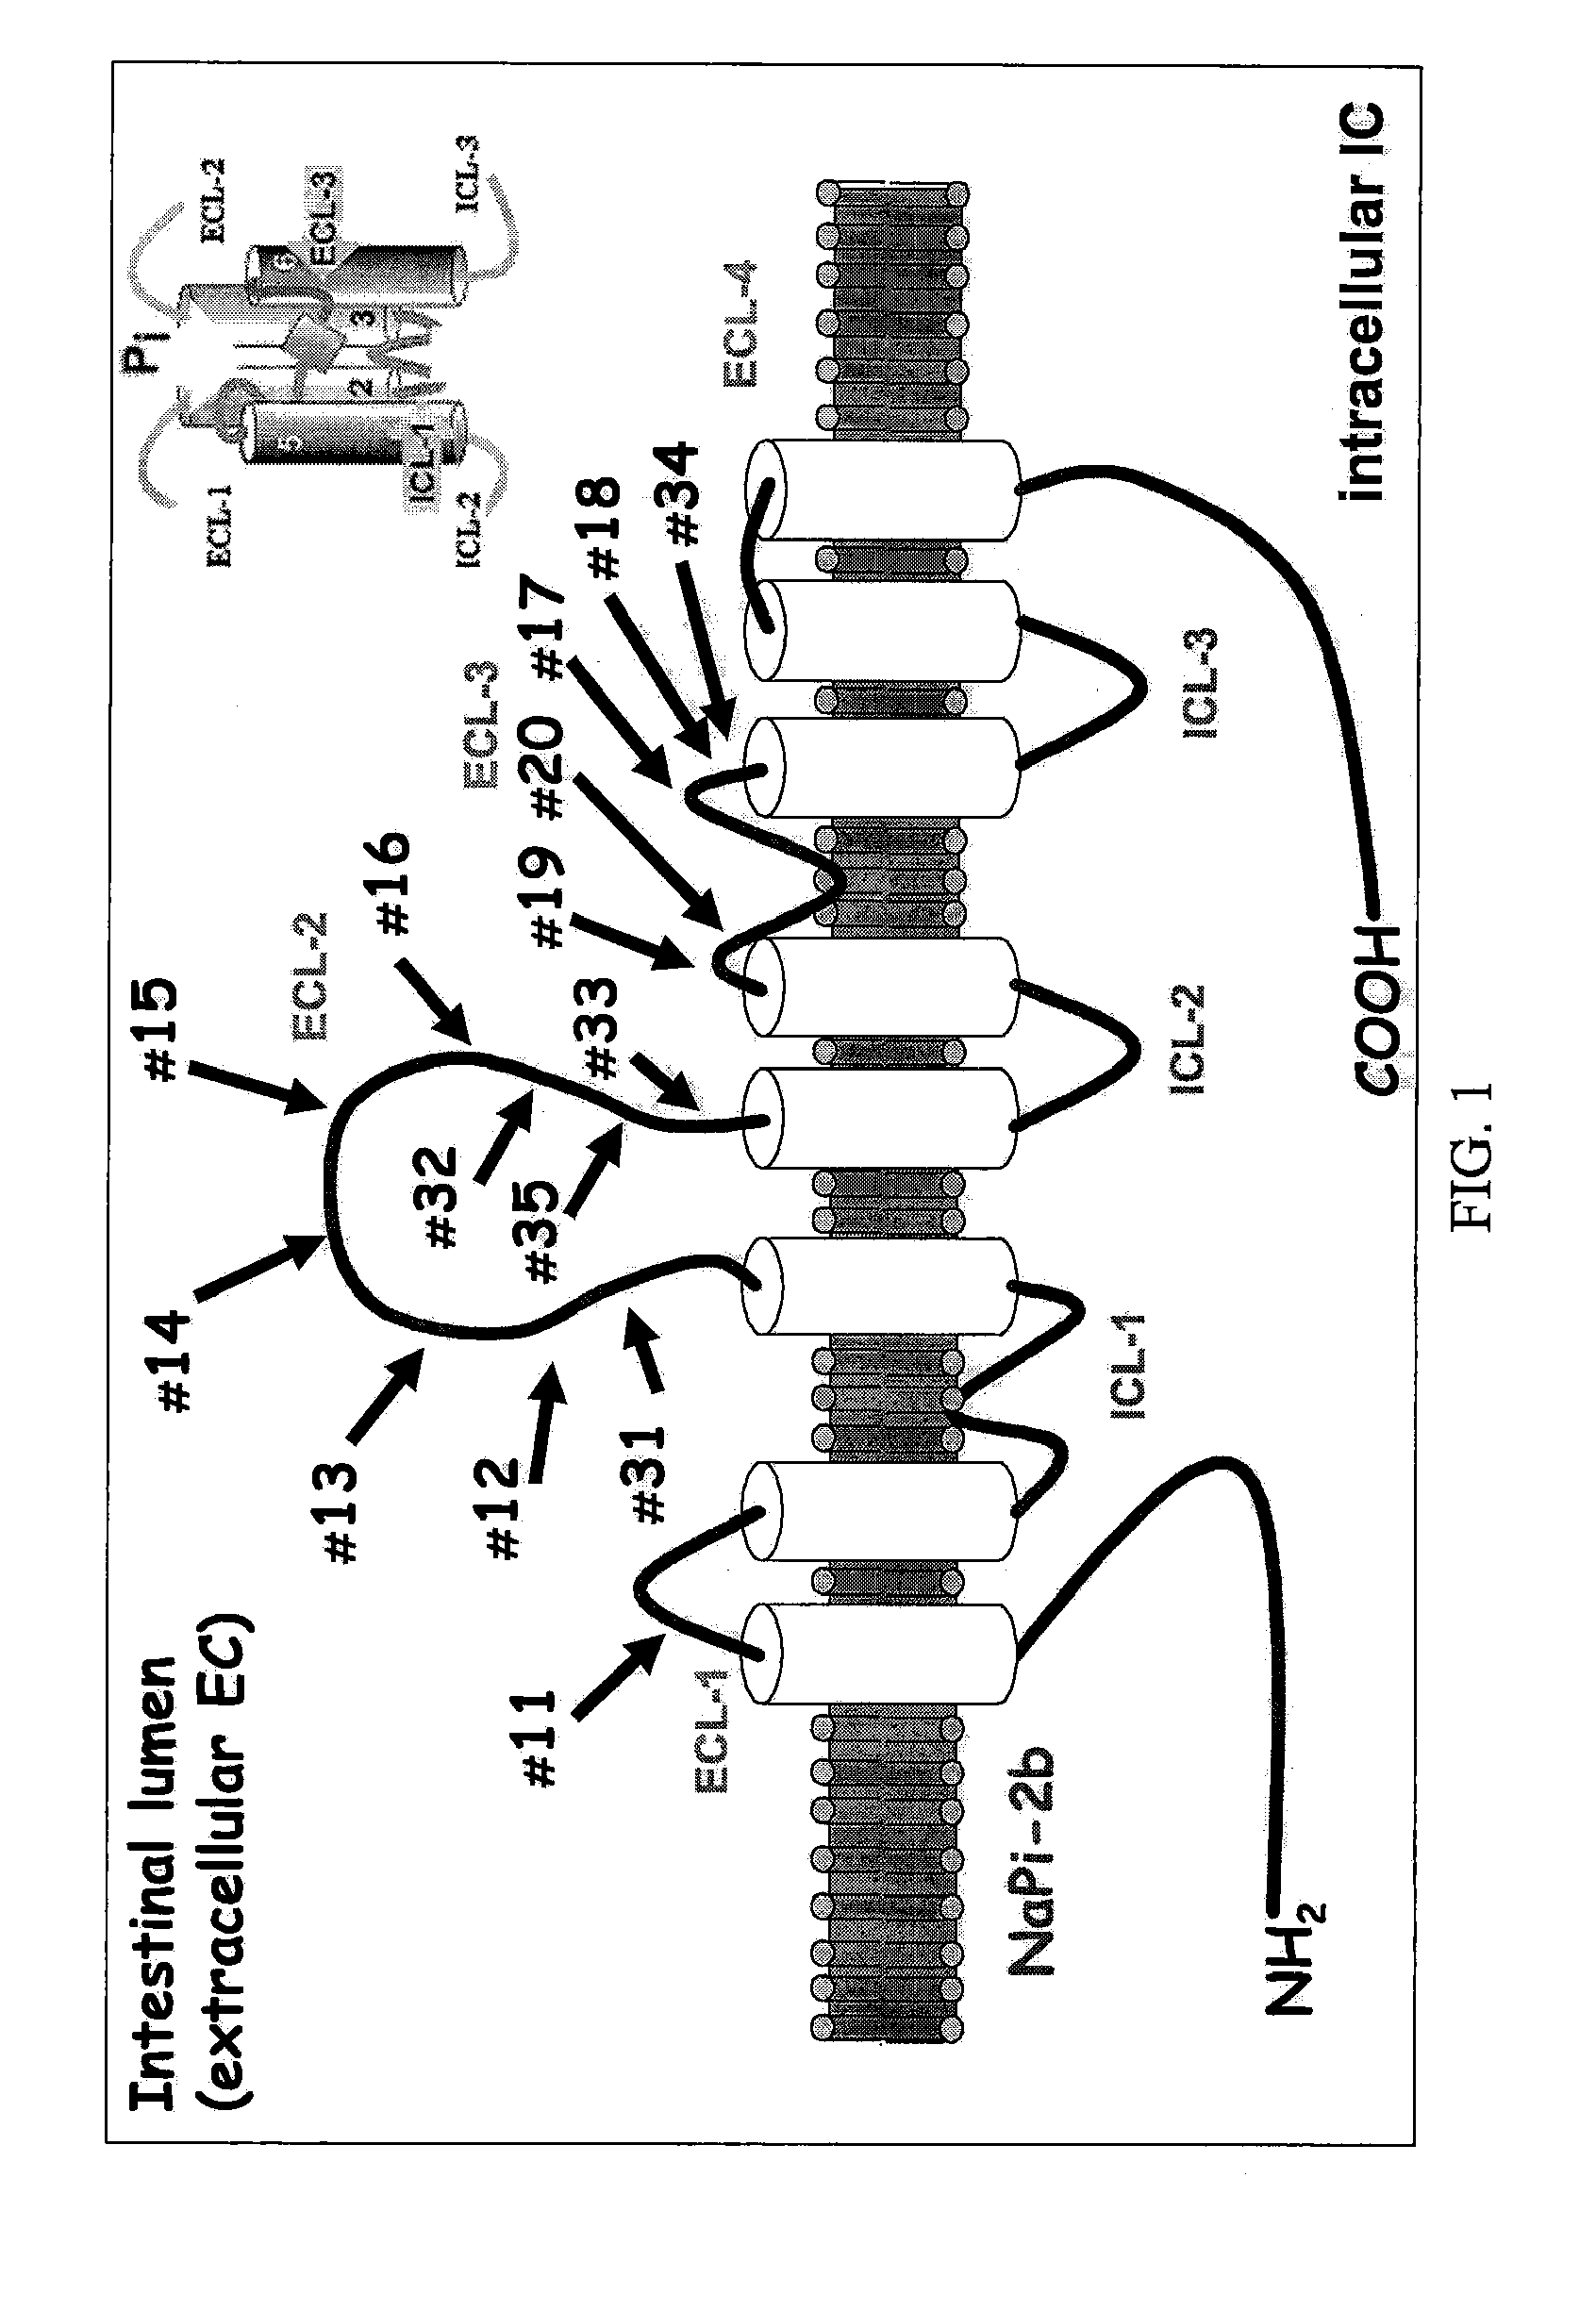 Method of reducing phosphate absorption by administering orally an IgY anti-intestinal sodium phosphate cotransporter type 2B antibody